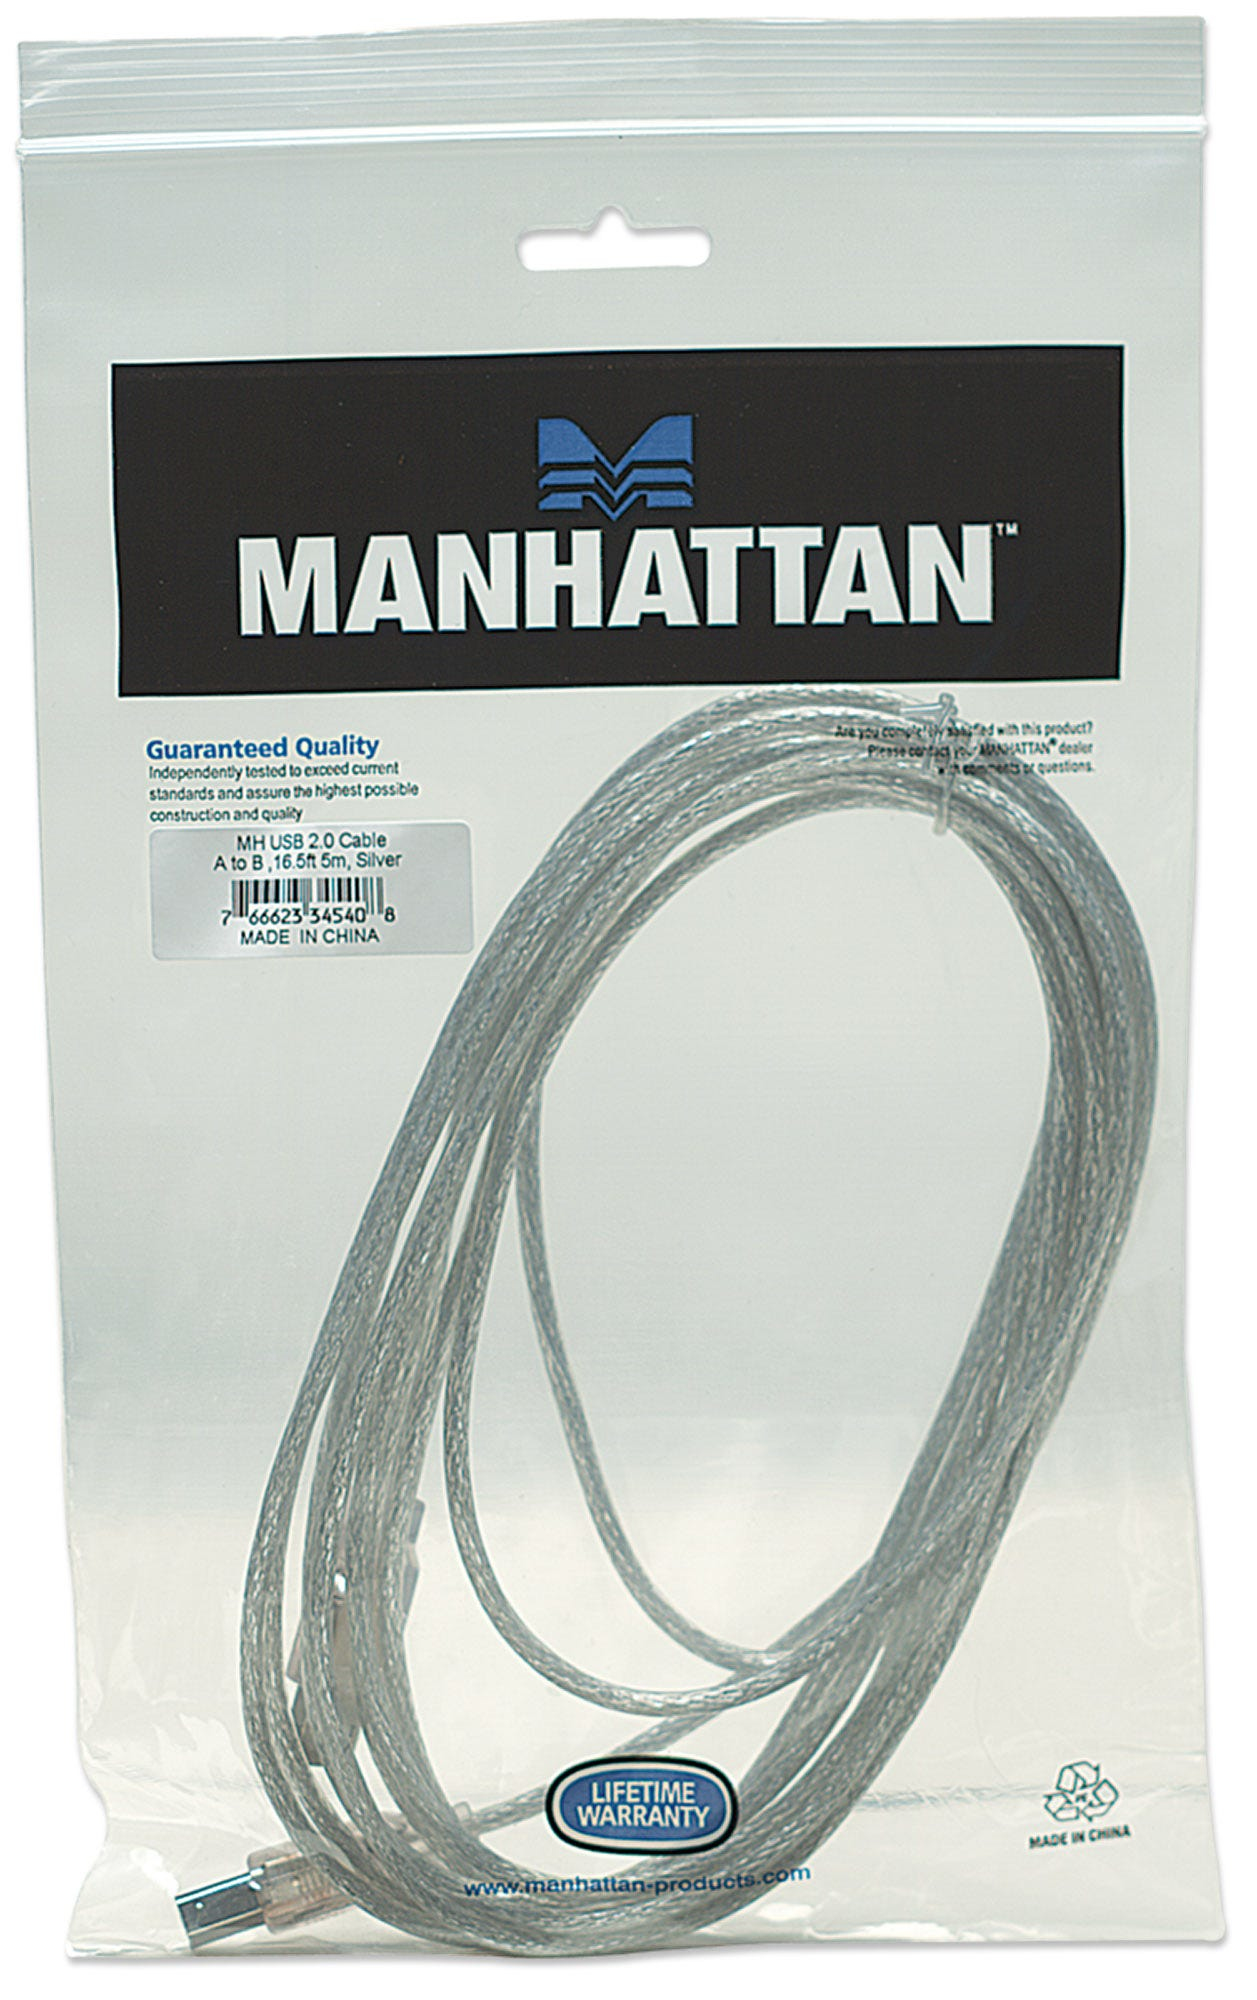 Manhattan USB-A to USB-B Cable, 5m, Male to Male, 480 Mbps (USB 2.0), Translucent Silver, Polybag